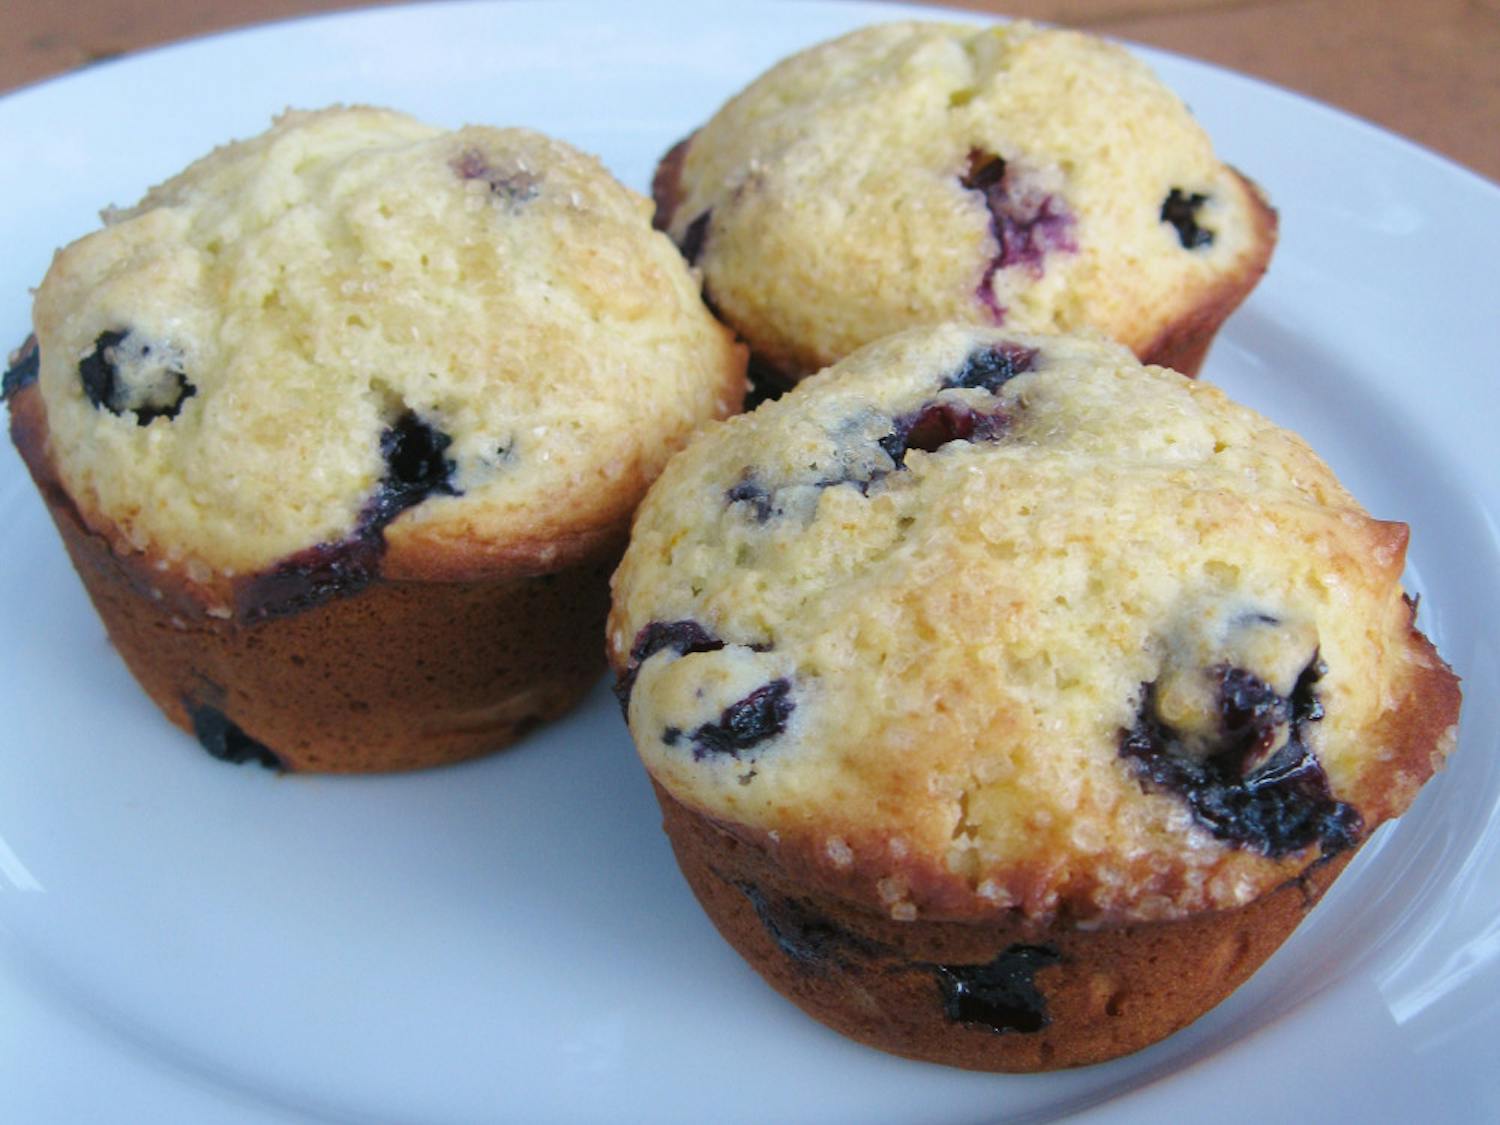 Orange and blueberry muffins